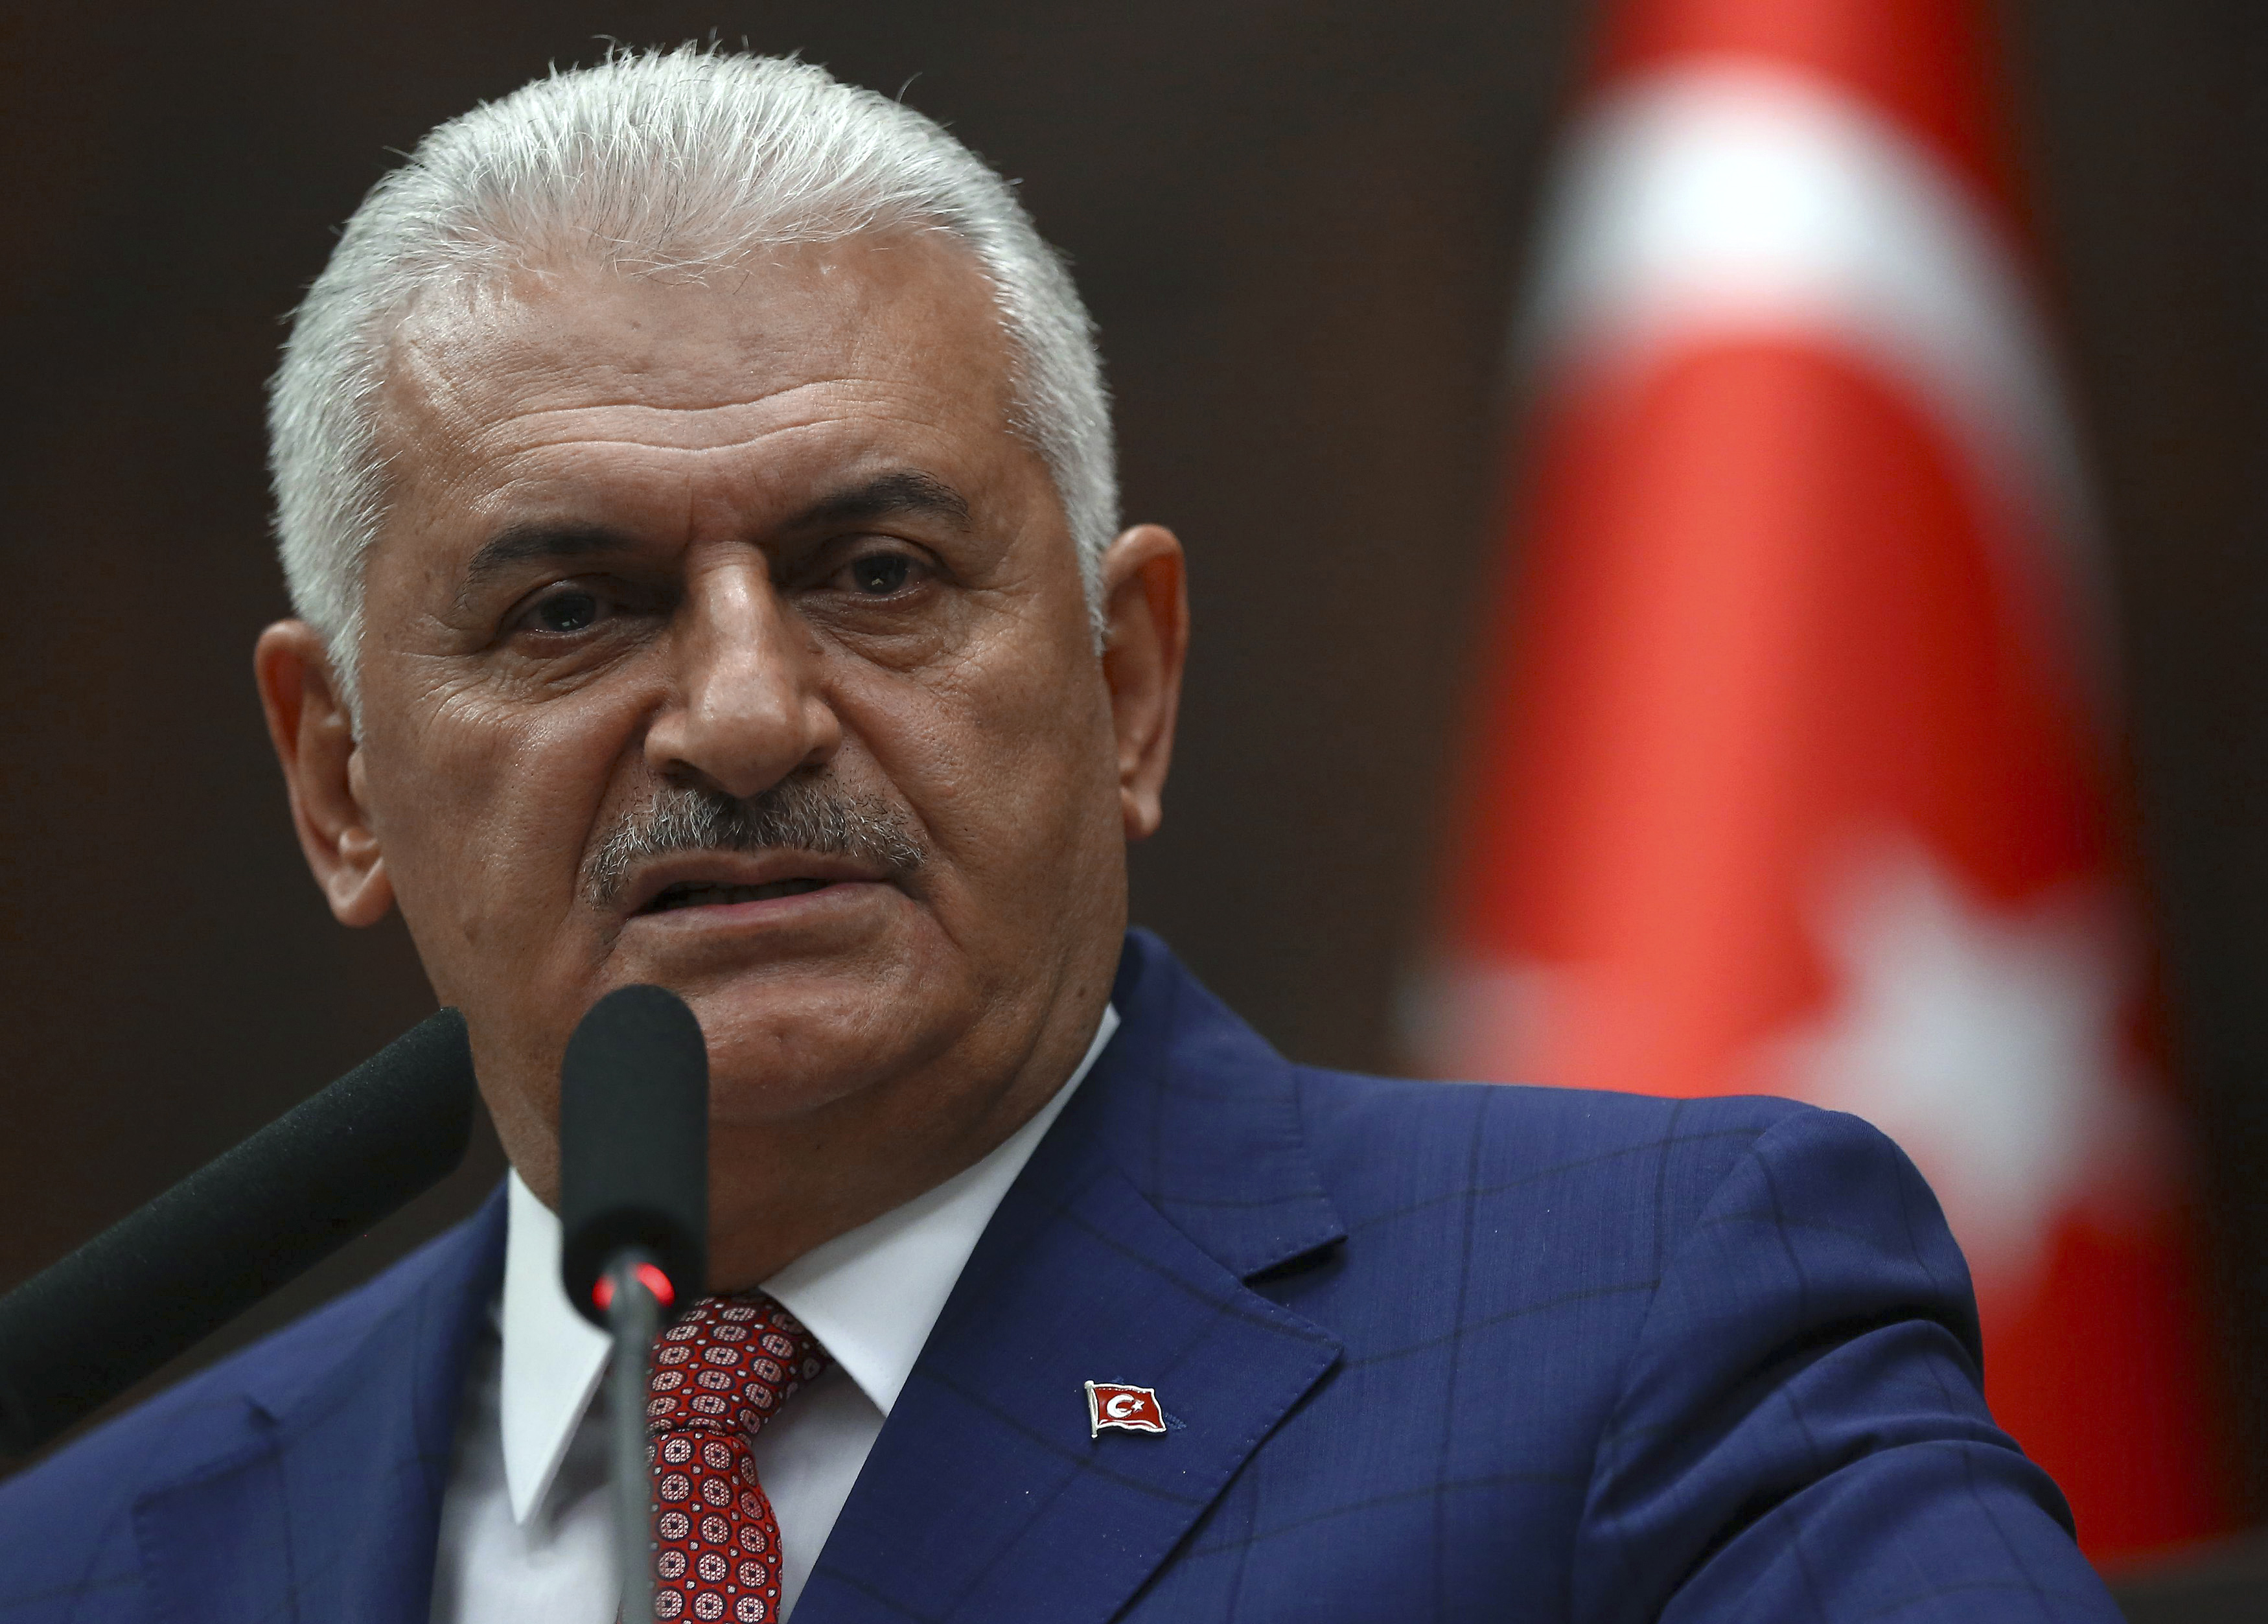 Turkish Prime Minister and leader of Turkey's ruling party, the Justice and Development Party (AK Party) Binali Yildirim addresses MPs during an AK Party's group meeting at the Grand National Assembly of Turkey (TBMM) in Ankara on June 21, 2016. / AFP PHOTO / ADEM ALTAN